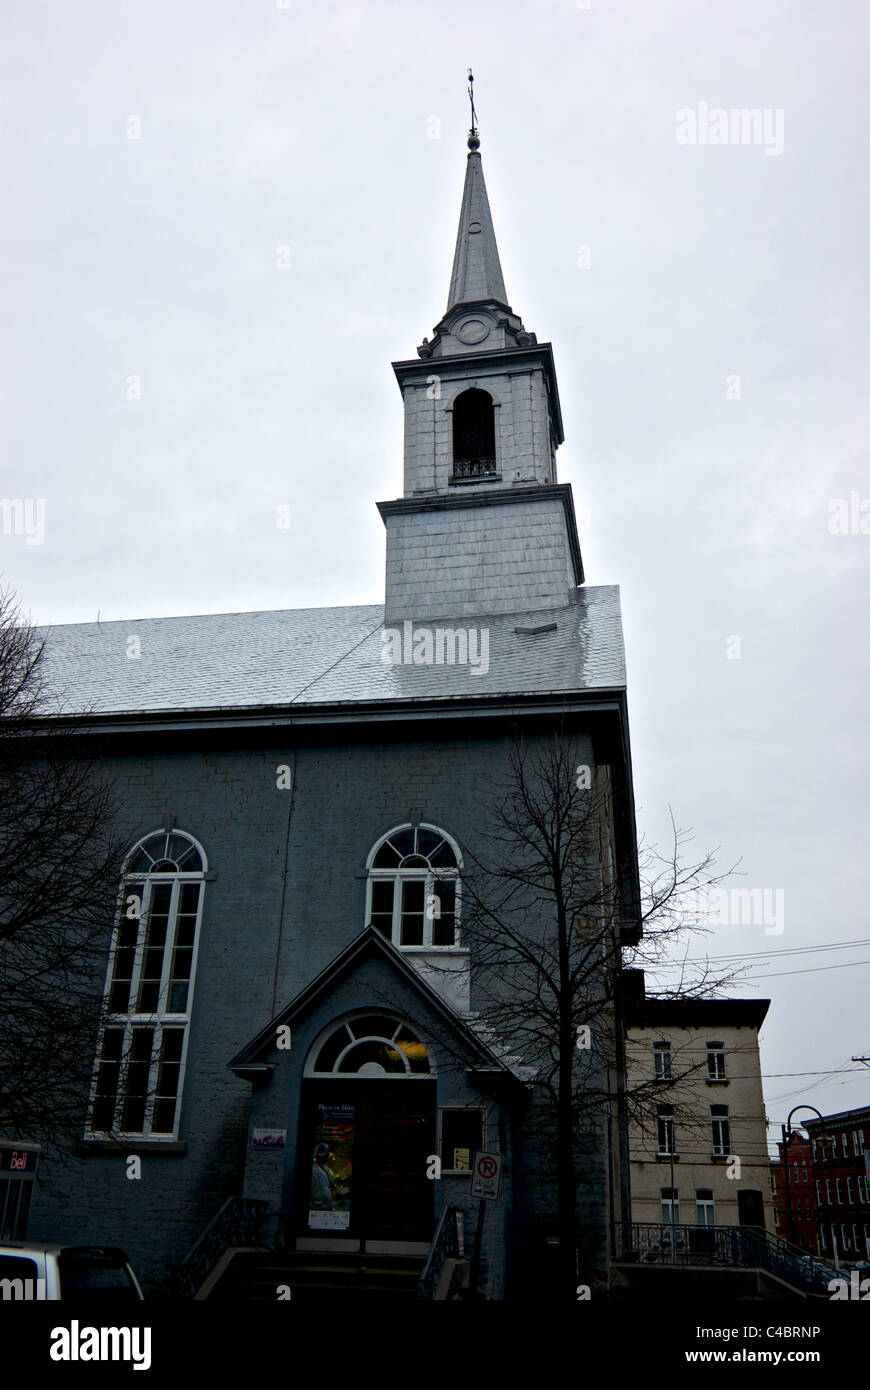 Crooked Church with leaning spire bell tower Saint-Roch district Quebec City in rain Stock Photo